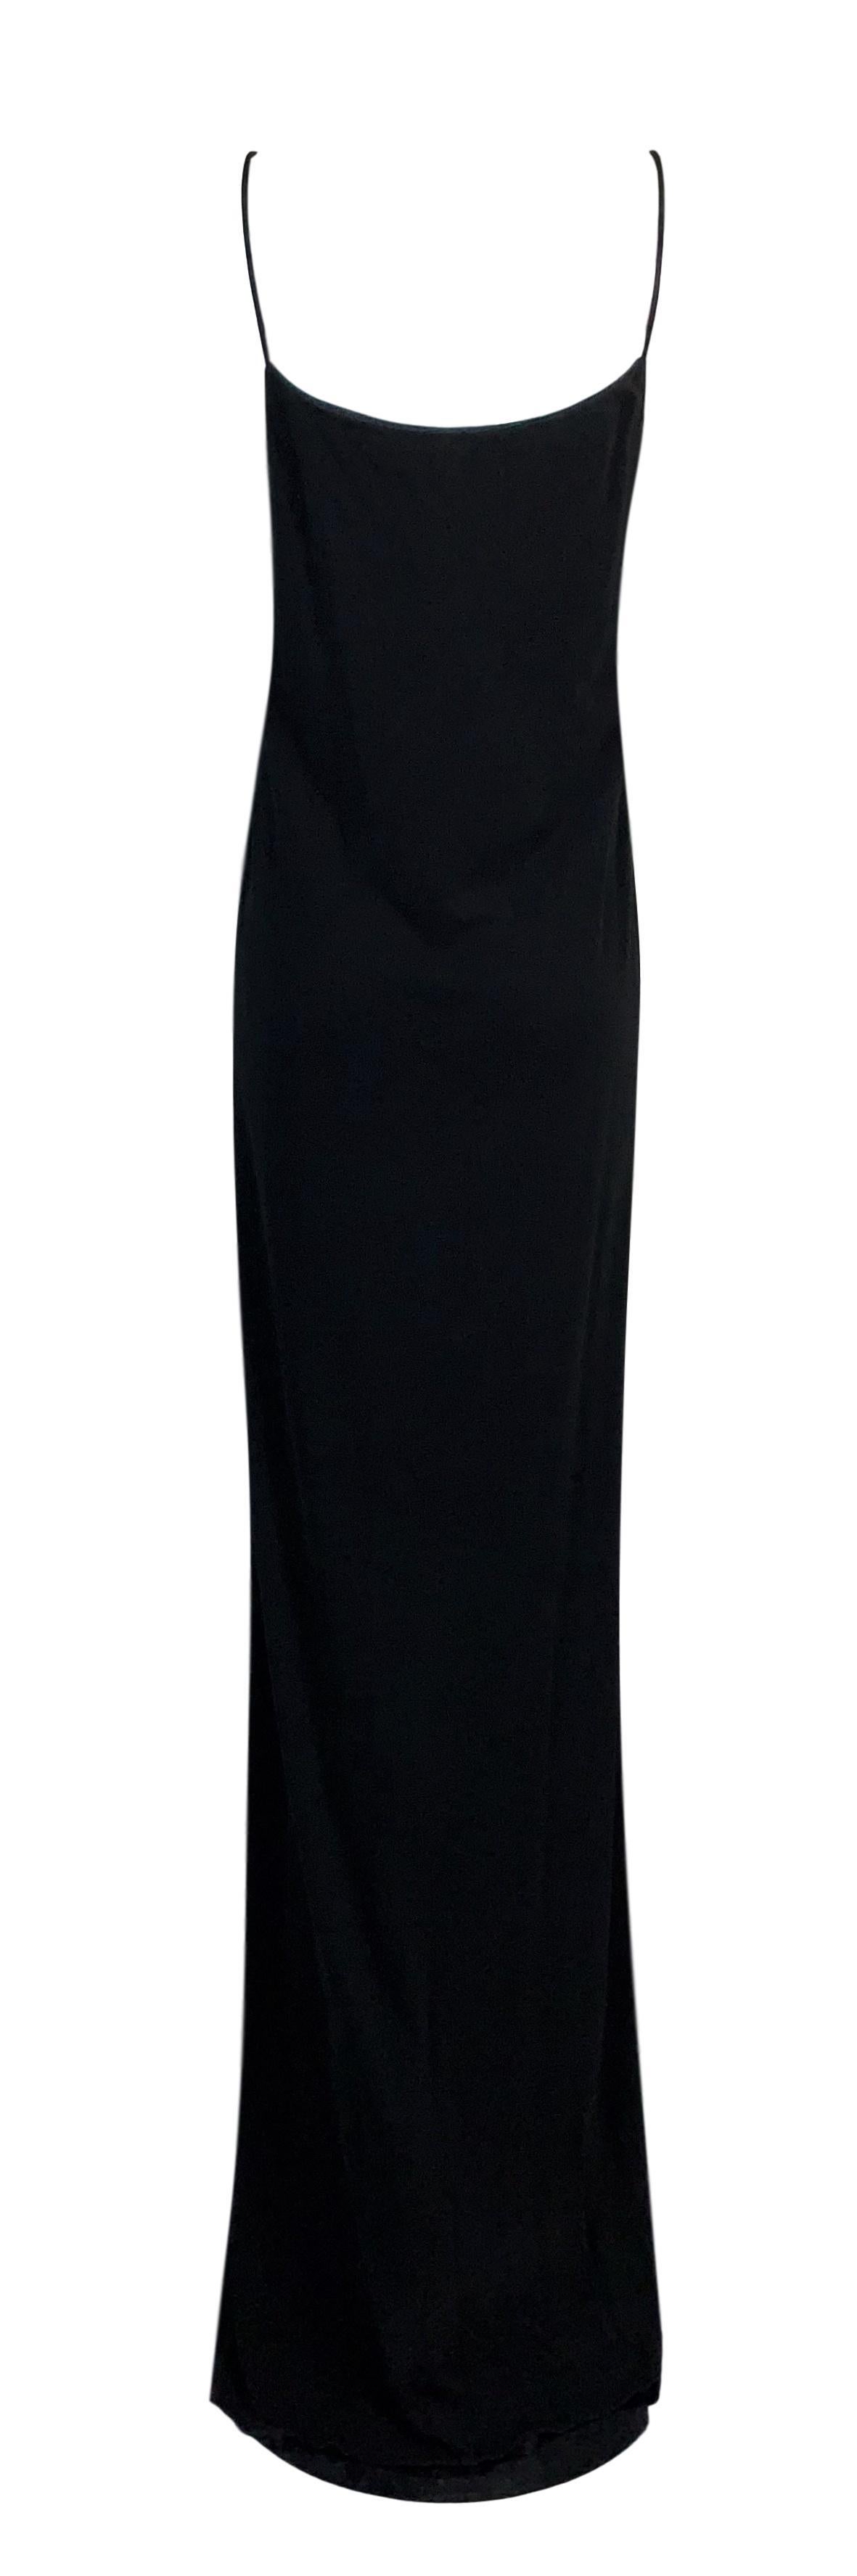 F/W 1996 Gucci Tom Ford Runway Black Cut-Out Sides Long Dress Gown In Good Condition In Yukon, OK